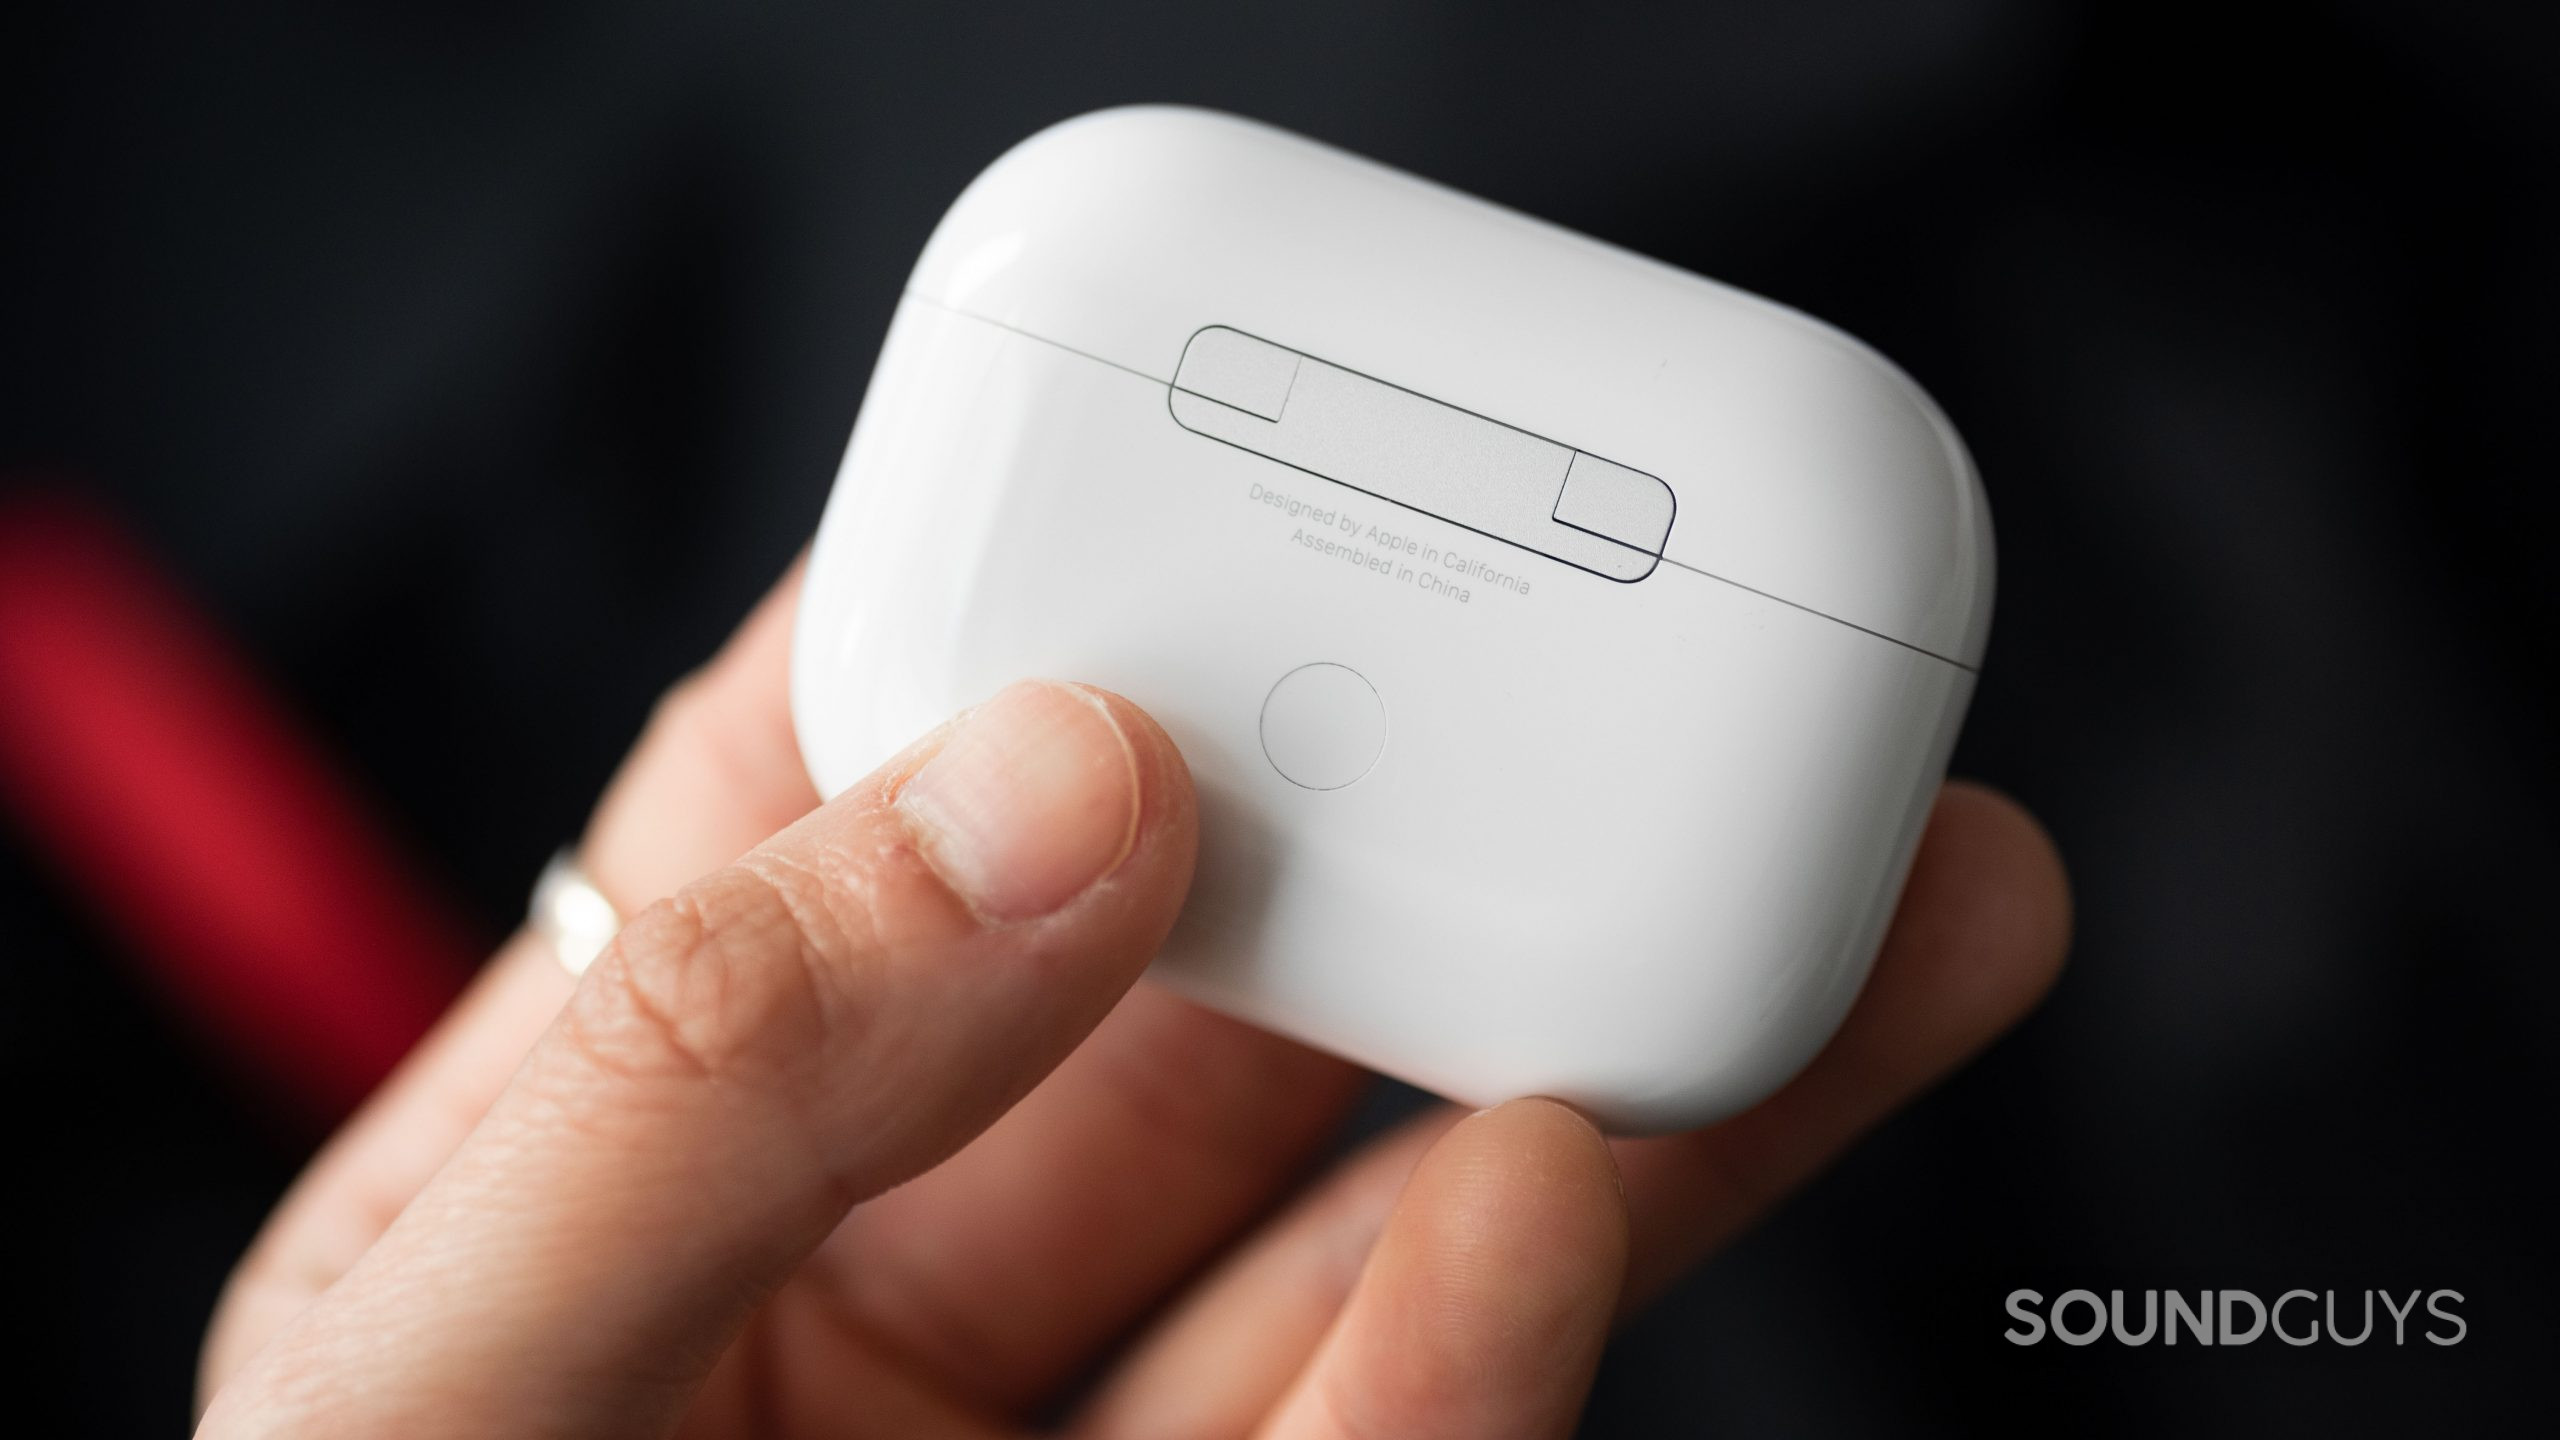 Only one of your AirPods working? Here's how to fix it - SoundGuys